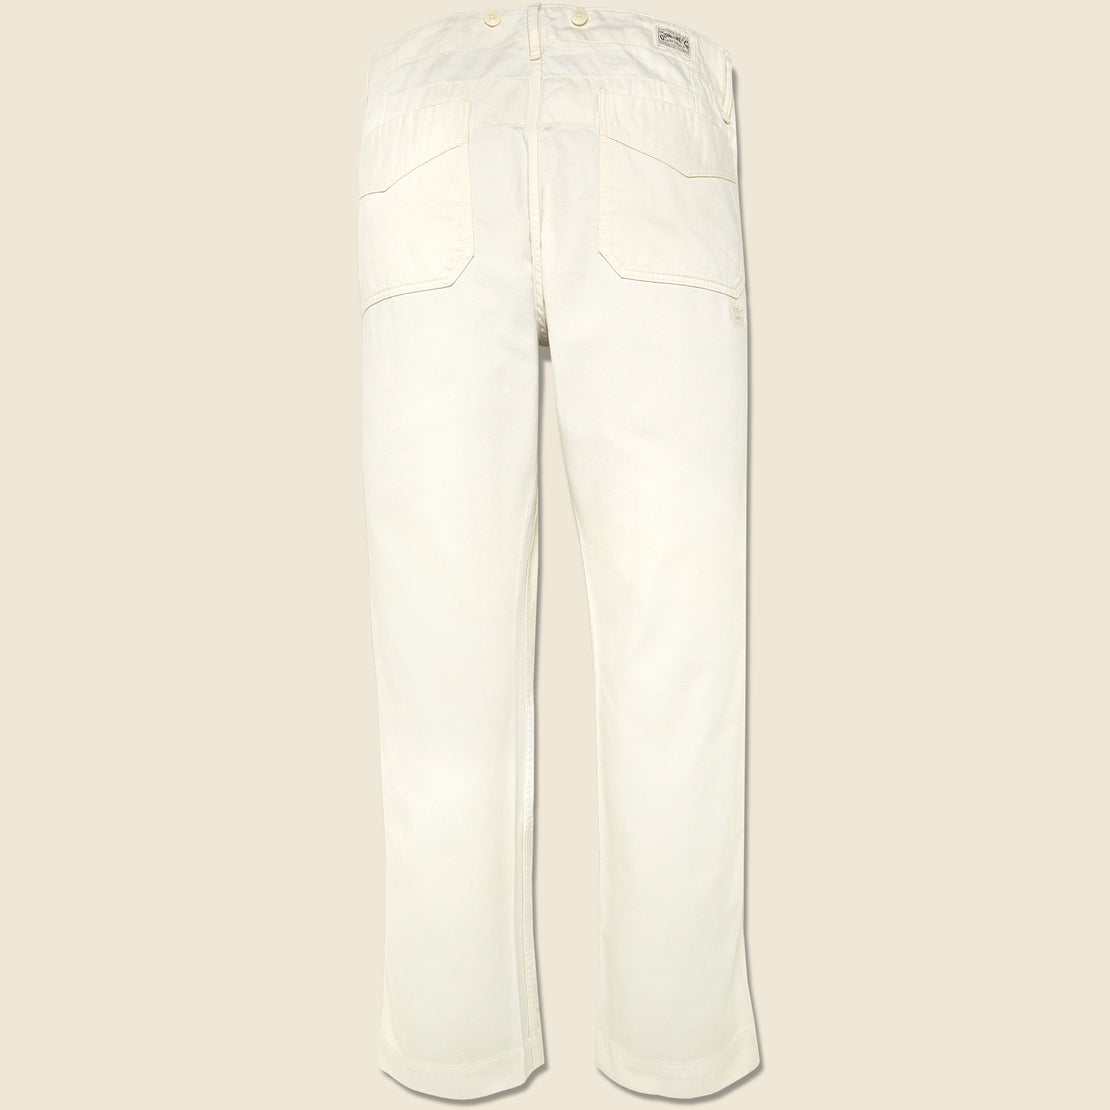 Mathieu Work Pant - Repaired Off White - RRL - STAG Provisions - Pants - Twill